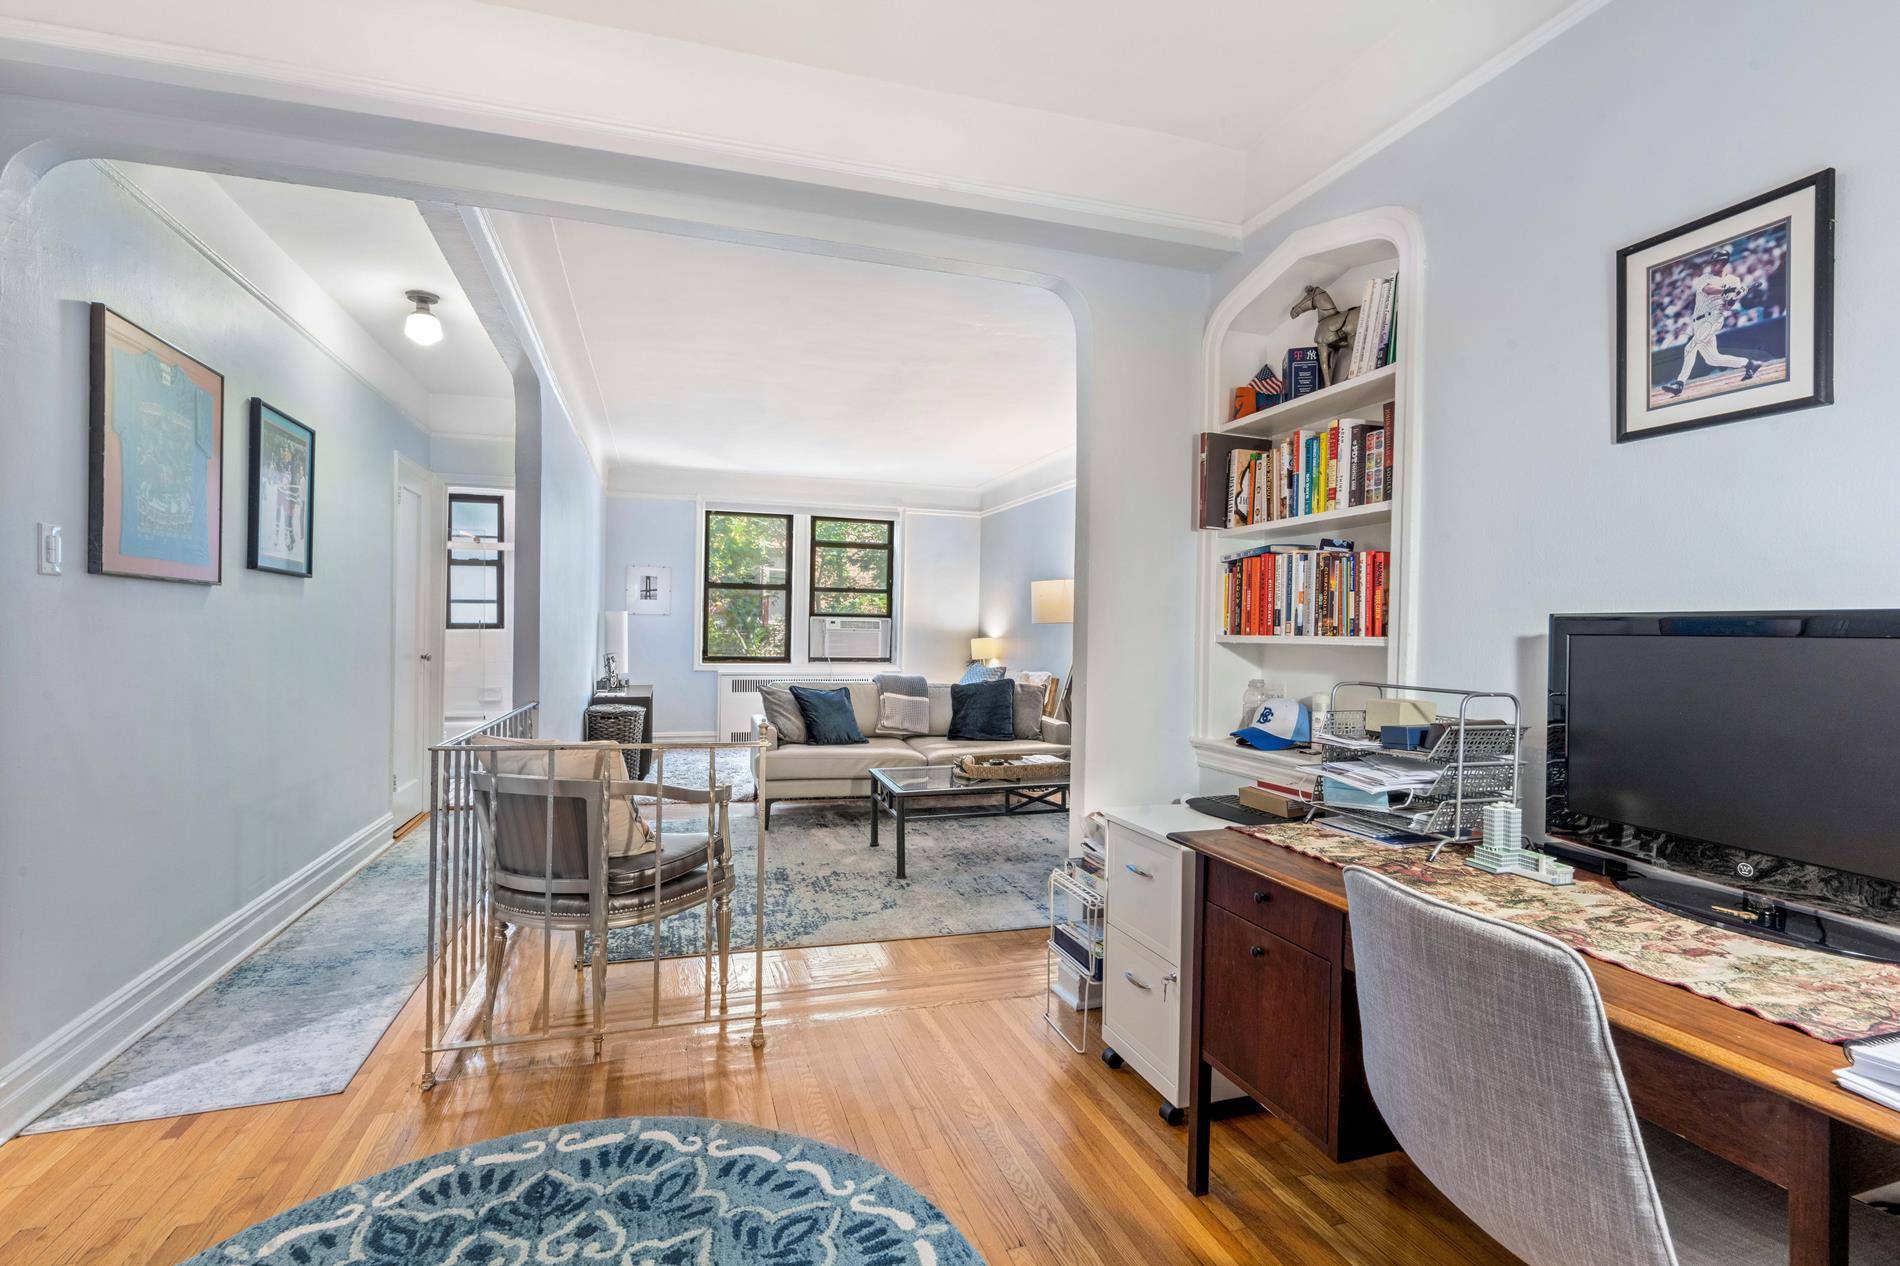 Super sized studio coop in the charming and highly desirable Ditmas Park neighborhood.